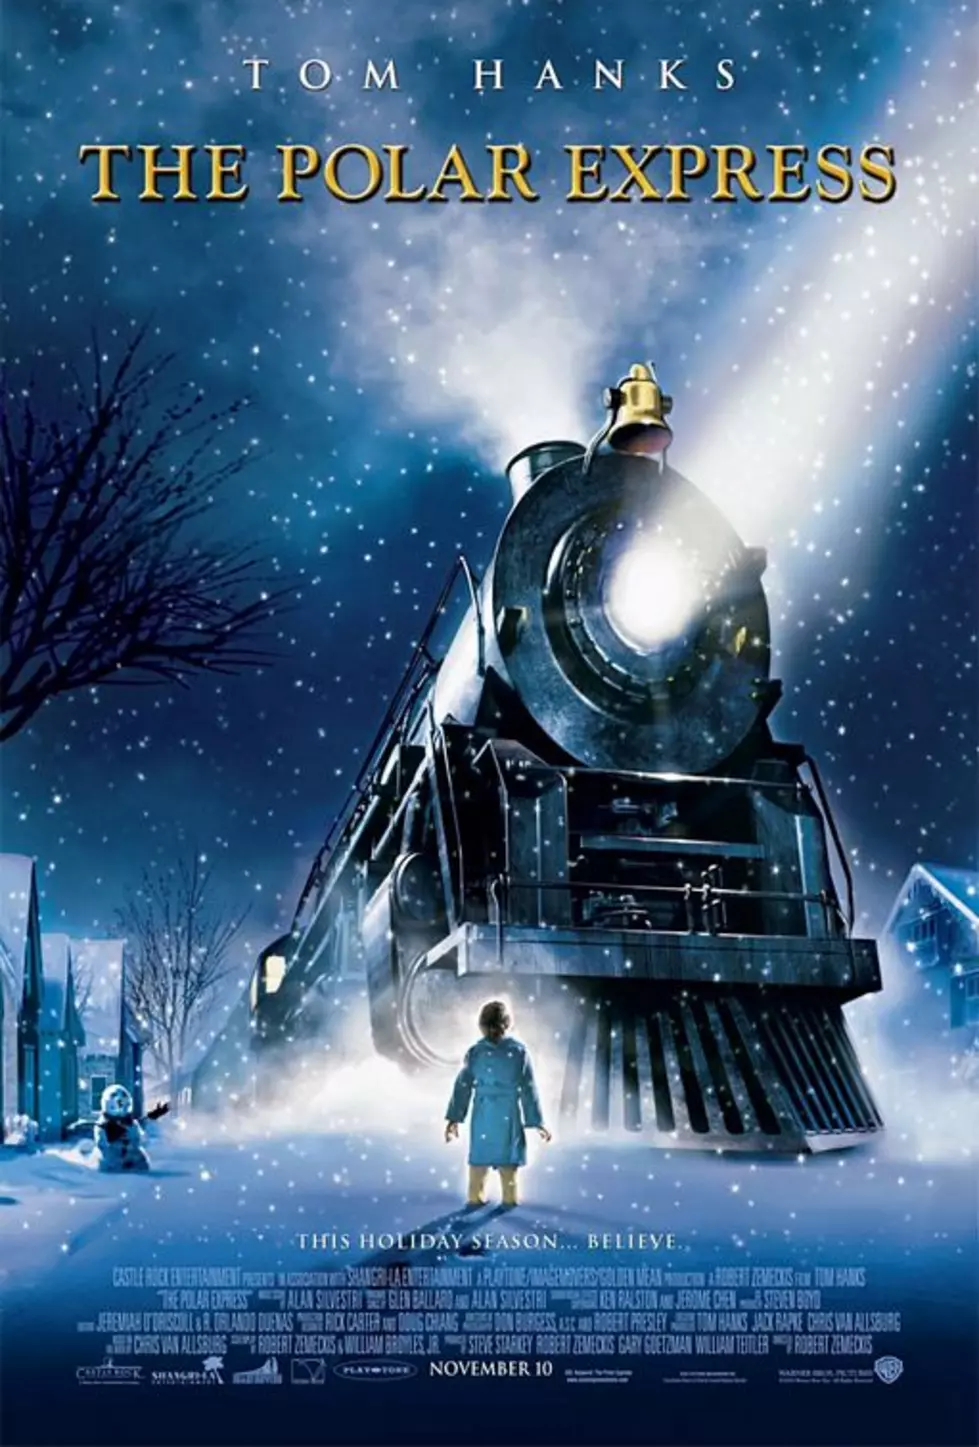 Get Your Tickets To Ride The Polar Express In Galveston